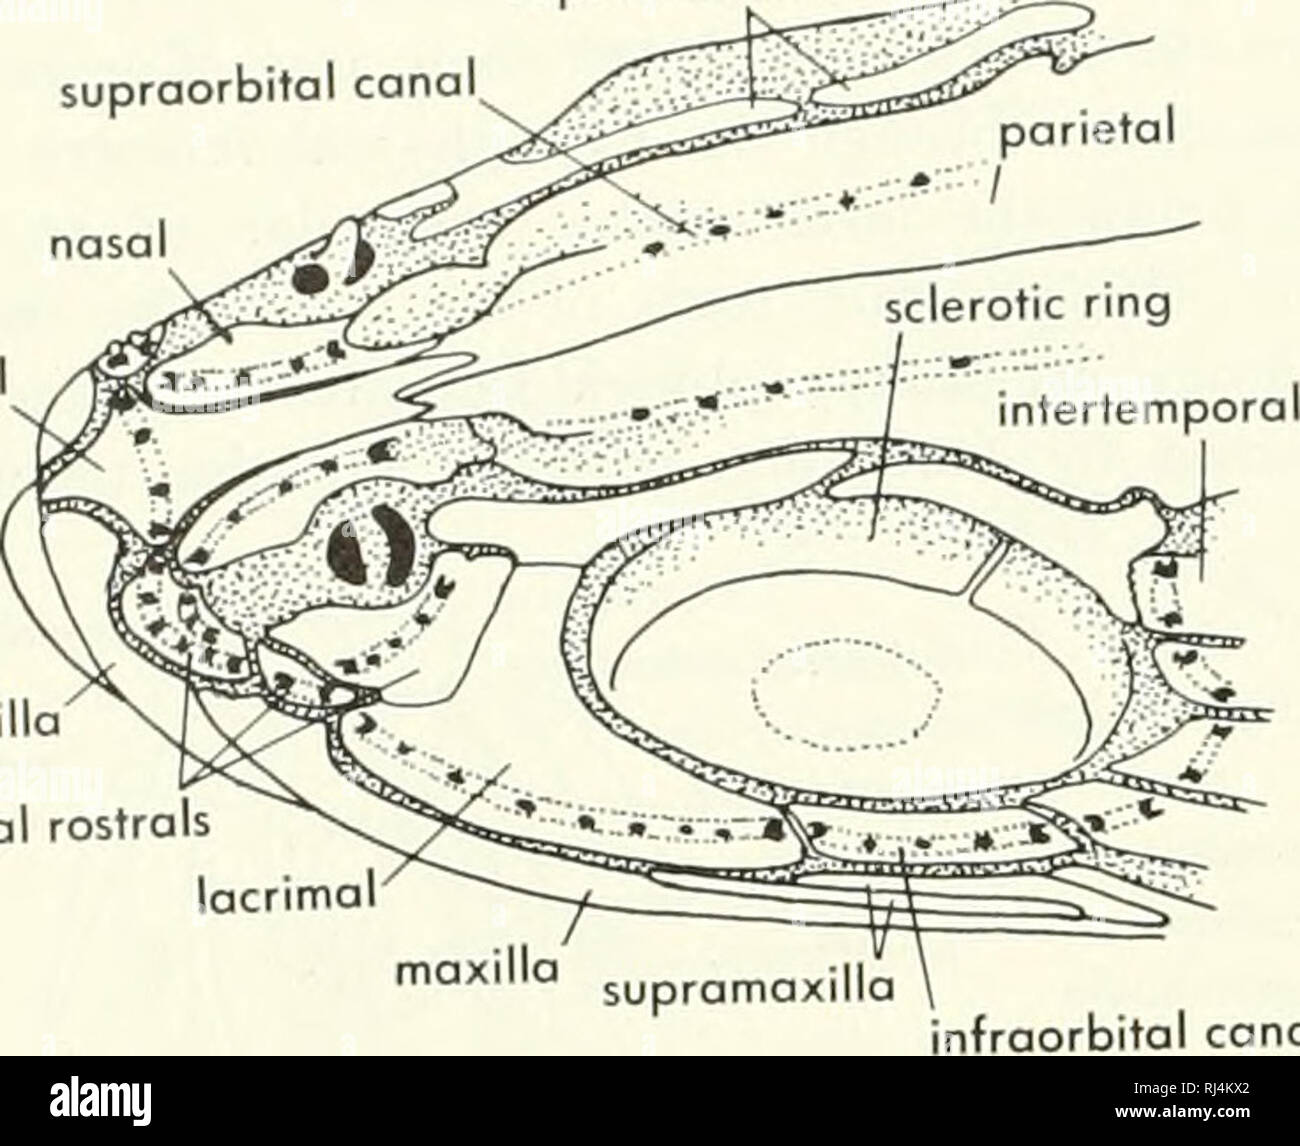 . Chordate morphology. Morphology (Animals); Chordata. supraorbitals supraorbital canal, nasal medial rostral. premaxilla lateral rostrals lacrimal maxilla nfraorbital canal Figure 5-4. Anterolateral and somewhat dorsal view of snout skeleton of £/ops sourus showing &quot;supraorbitals&quot; and &quot;rostrals.&quot; (After Nybelin, 1957) nasal capsule trabecule communis otic capsule parachordal cartilage notochord trabecule communis orbital cartilage Meckel's cartilage orbital cartilage palatine branch VII facial foramen which separates the myodome into bilateral chambers, and by the attachme Stock Photo